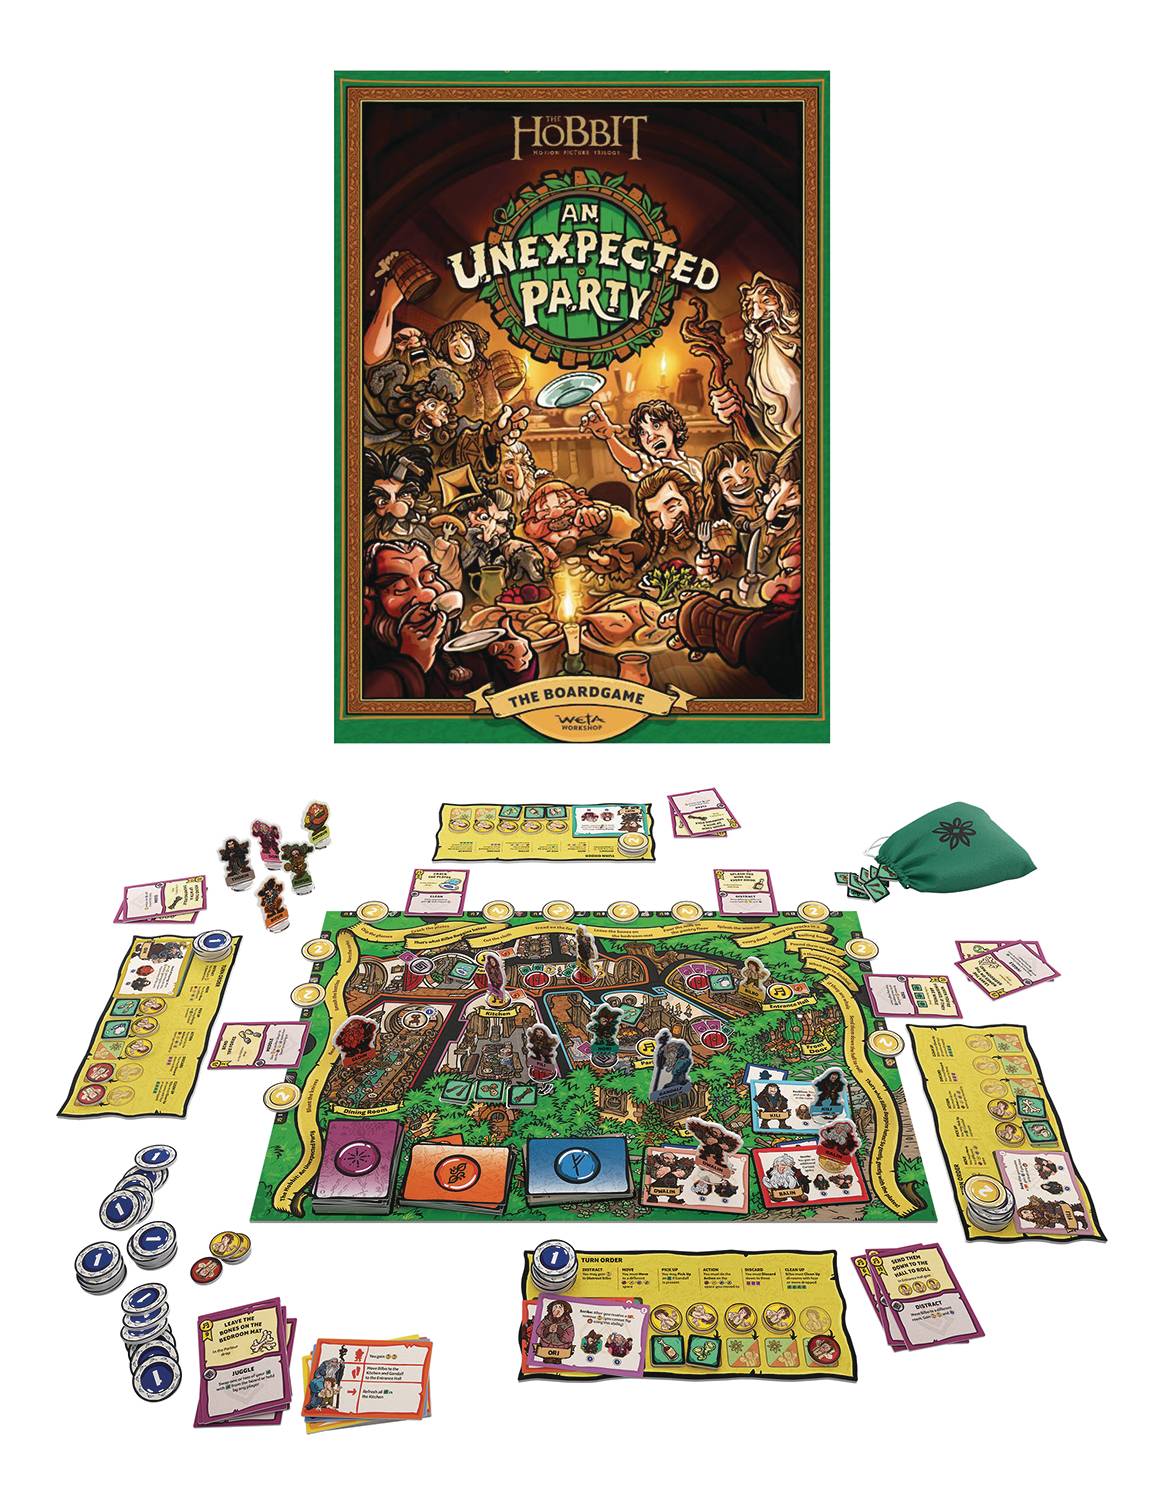 THE HOBBIT AN UNEXPECTED PARTY BOARDGAME